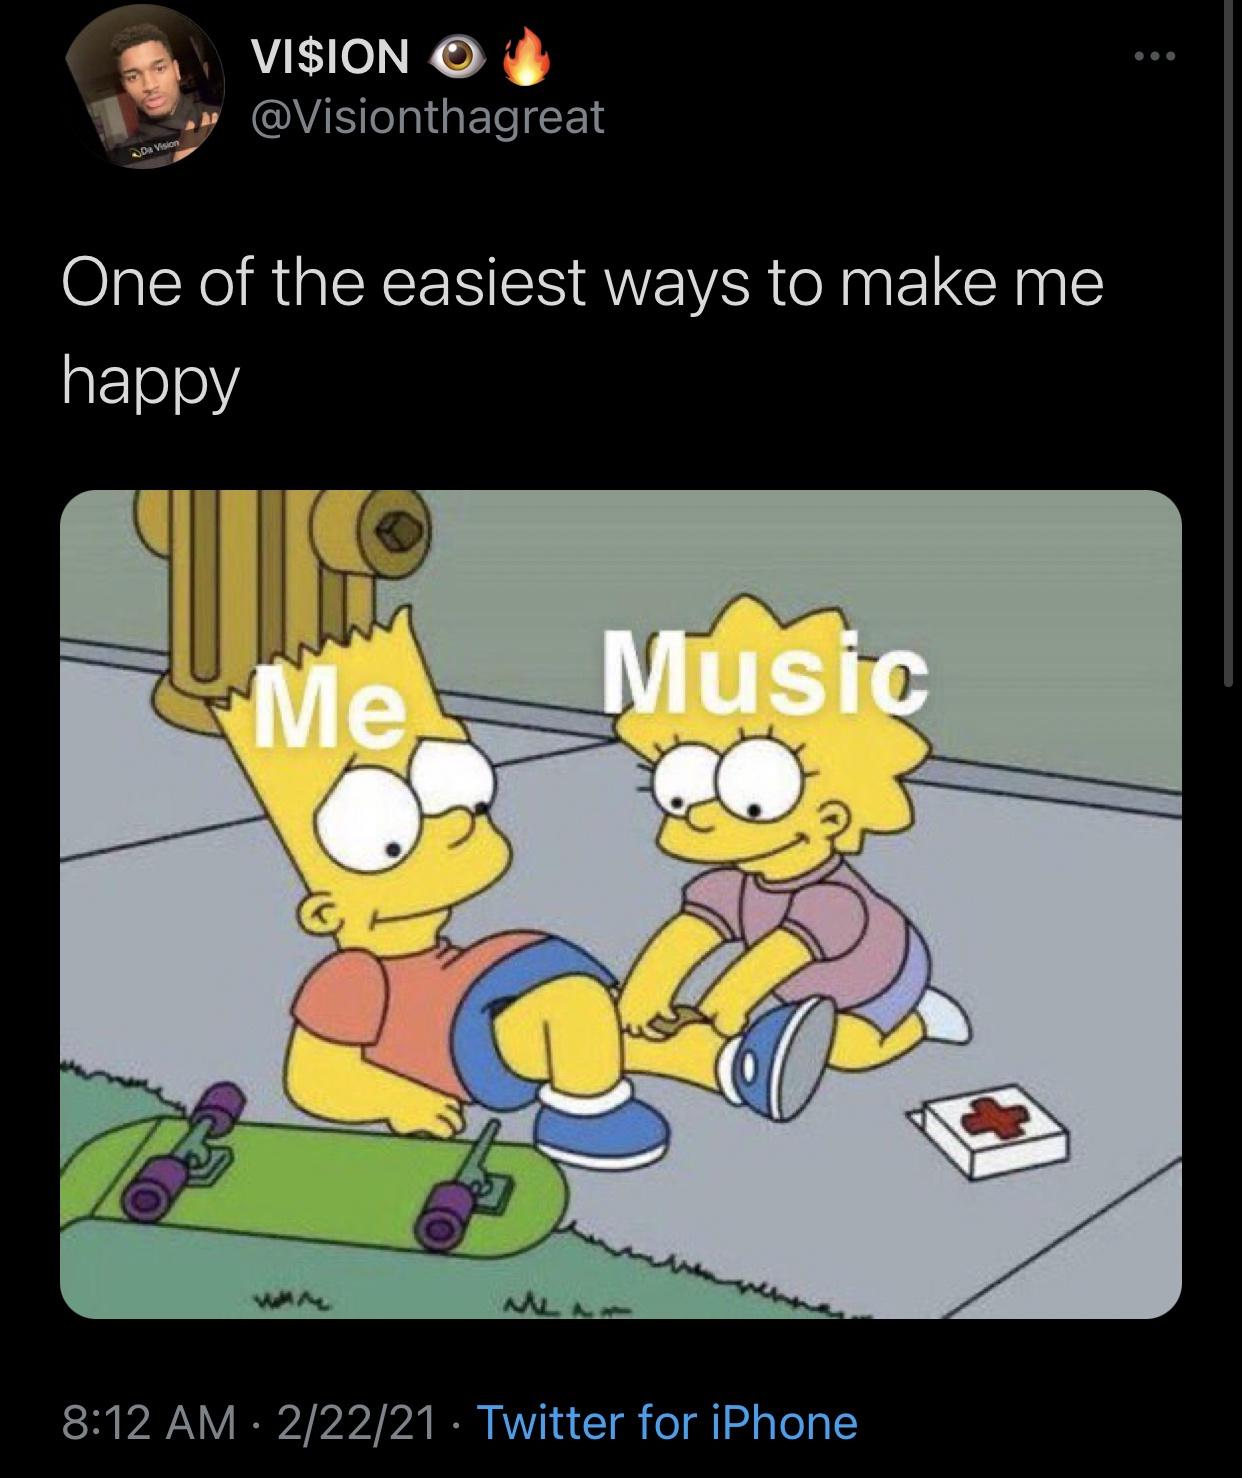 dank depression memes - Vision O Da Vision One of the easiest ways to make me happy Me Music Wa M 22221 Twitter for iPhone